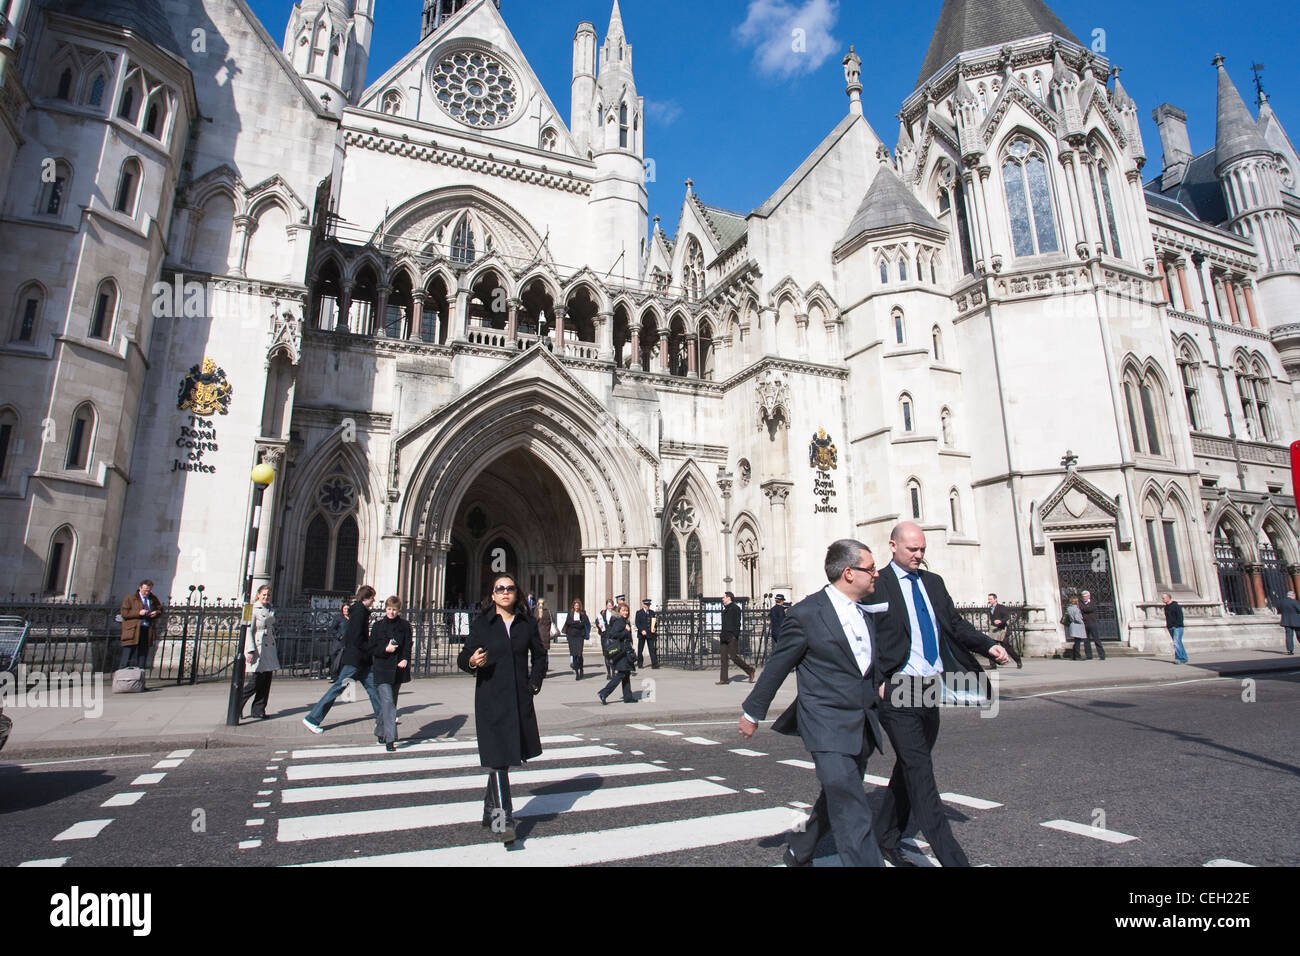 High Court, The Royal Courts of Justice, London, England, UK. Stock Photo